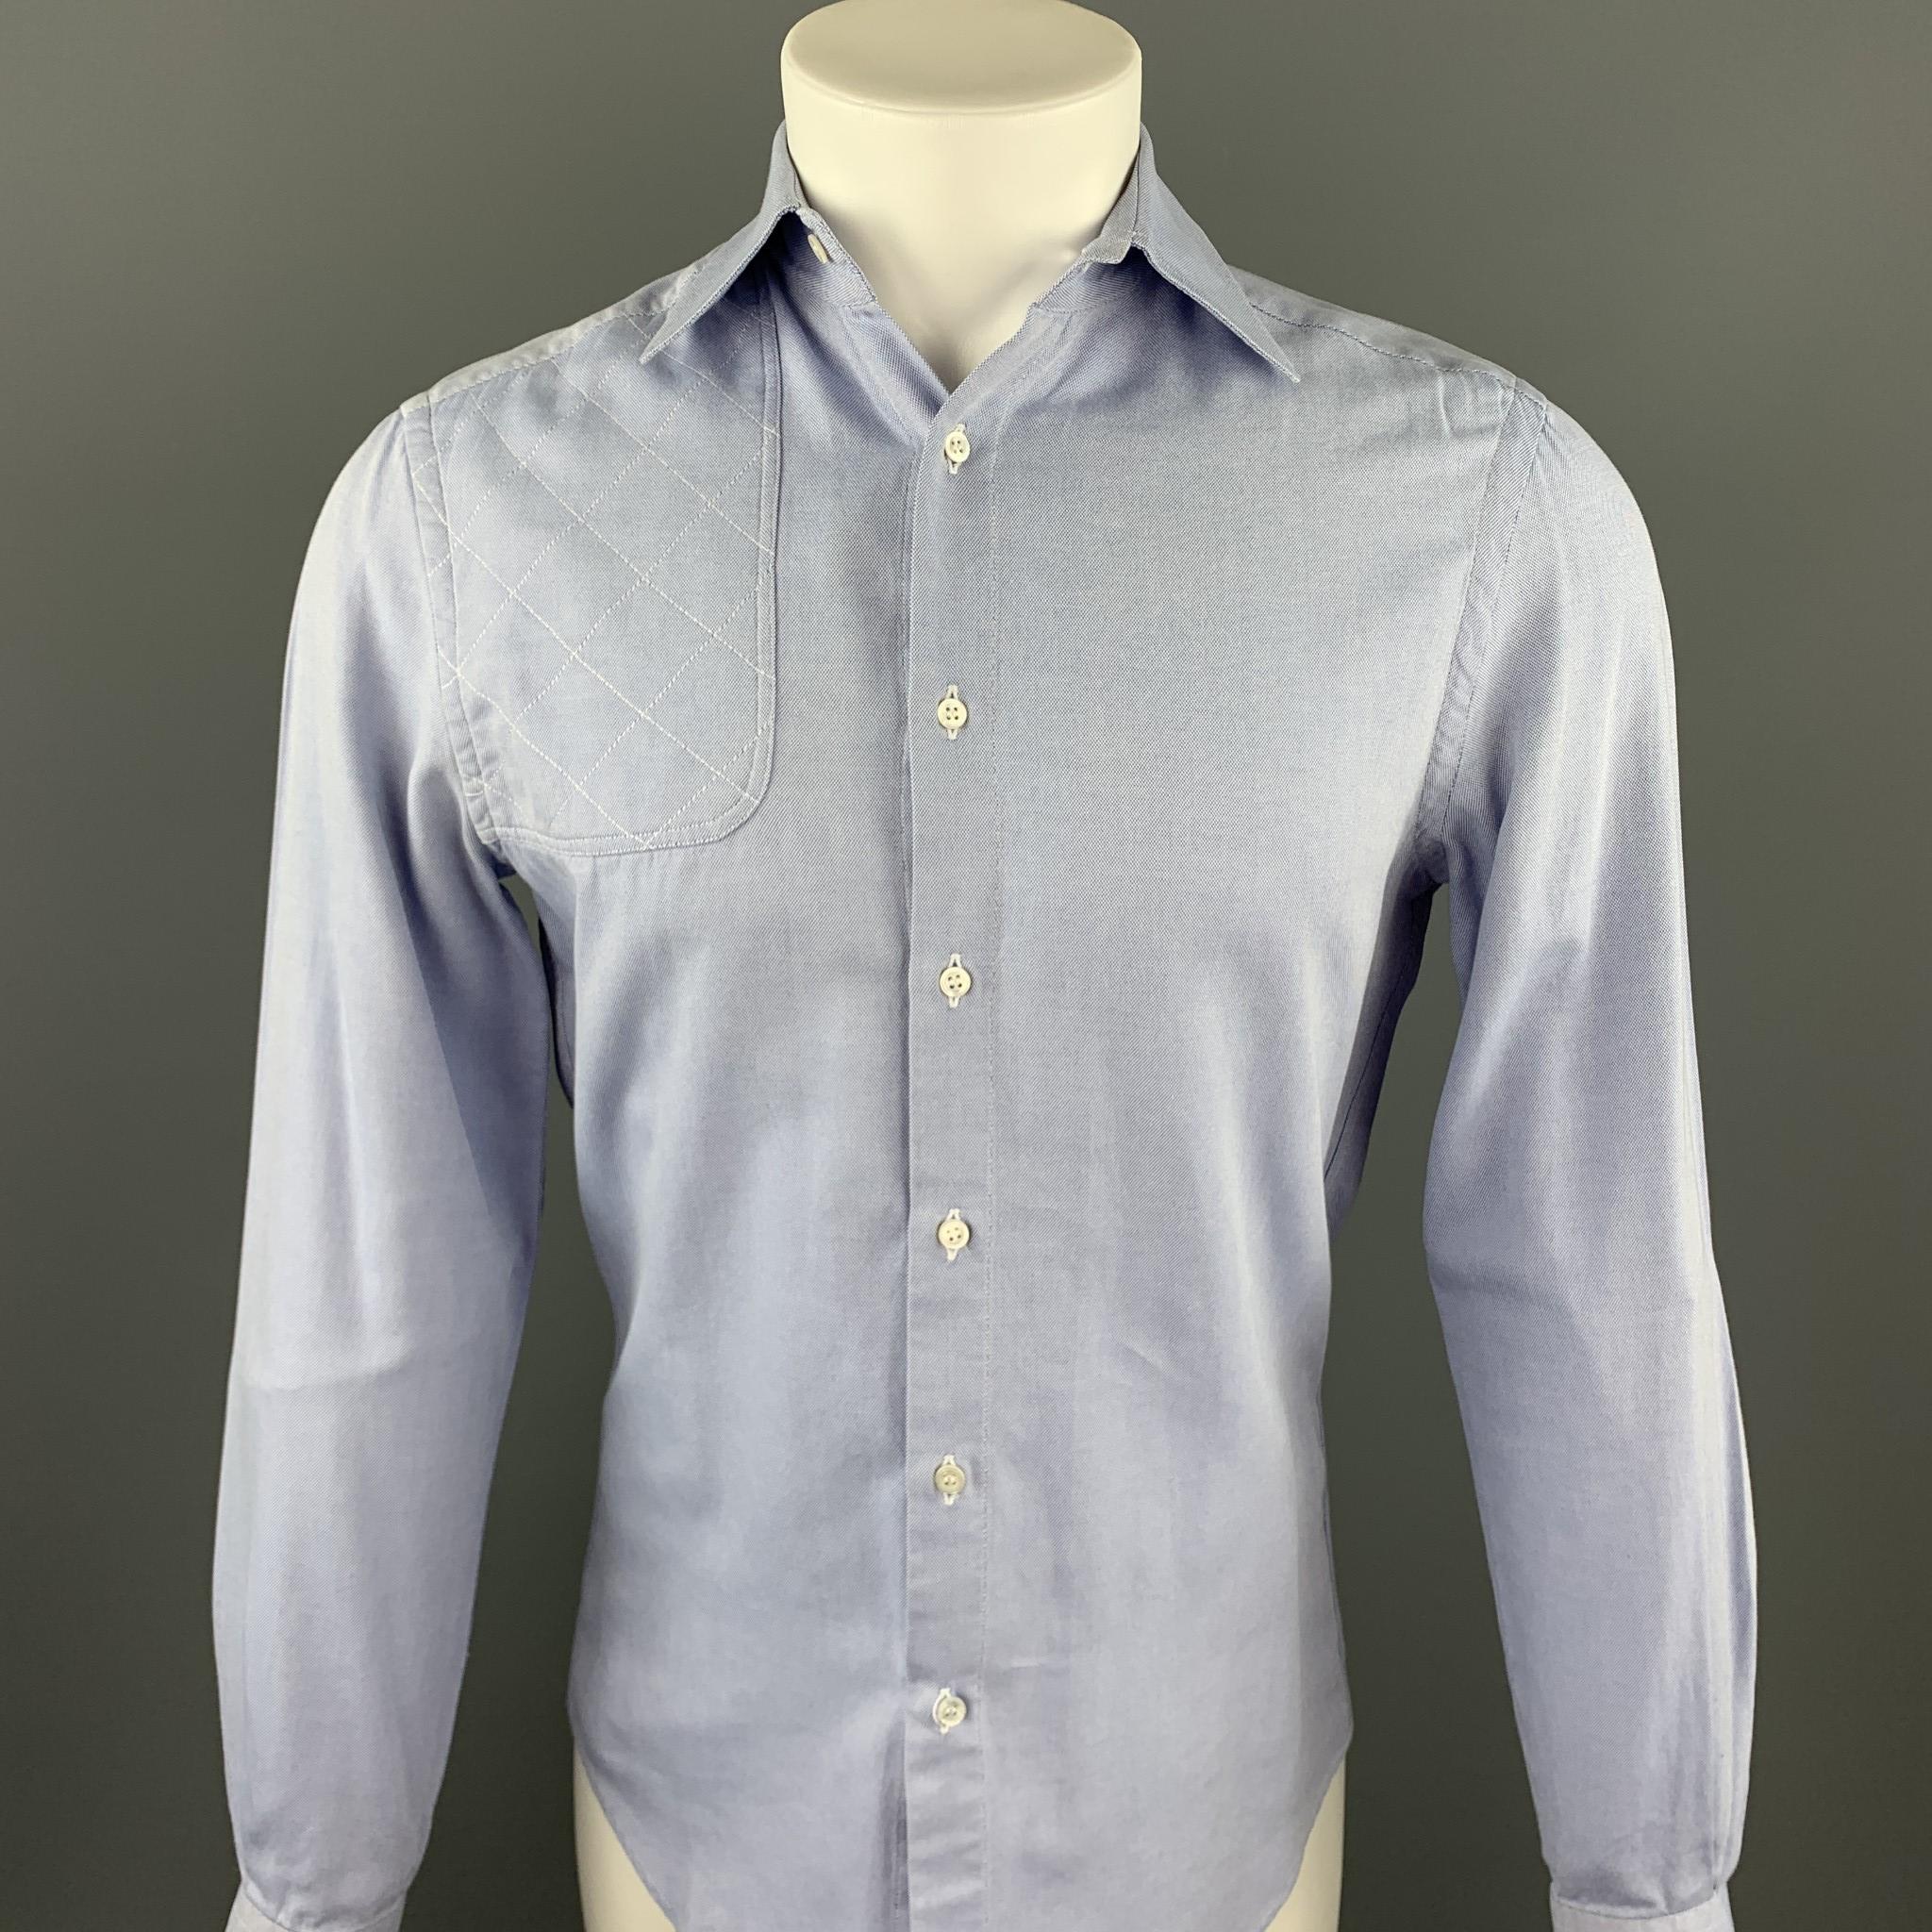 MICHAEL BASTIAN long sleeve shirt comes in a light blue cotton featuring a button up style, quilted patch, and a spread collar. Made in USA.

Excellent Pre-Owned Condition.
Marked: 15/38

Measurements:

Shoulder: 17 in. 
Chest: 38 in. 
Sleeve: 27